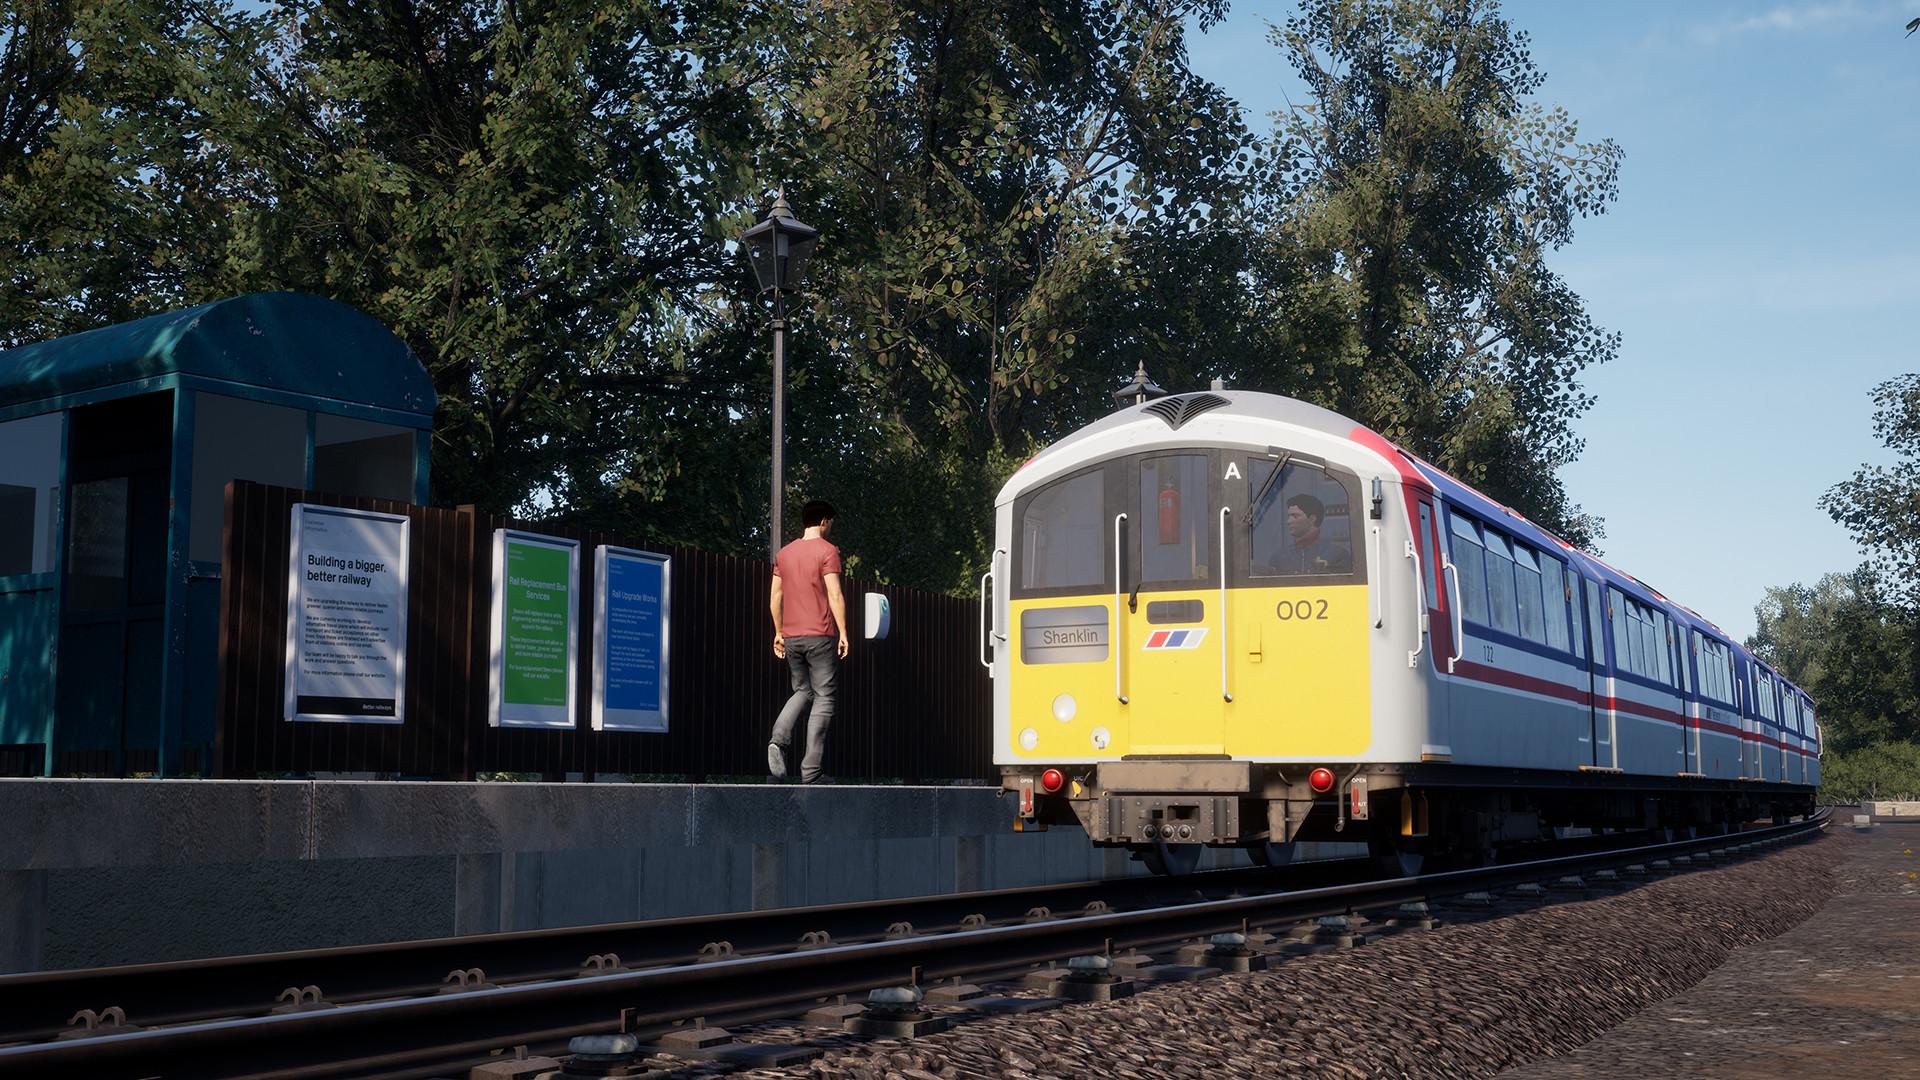 Train Sim World® 2: Isle Of Wight: Ryde - Shanklin Route Add-On